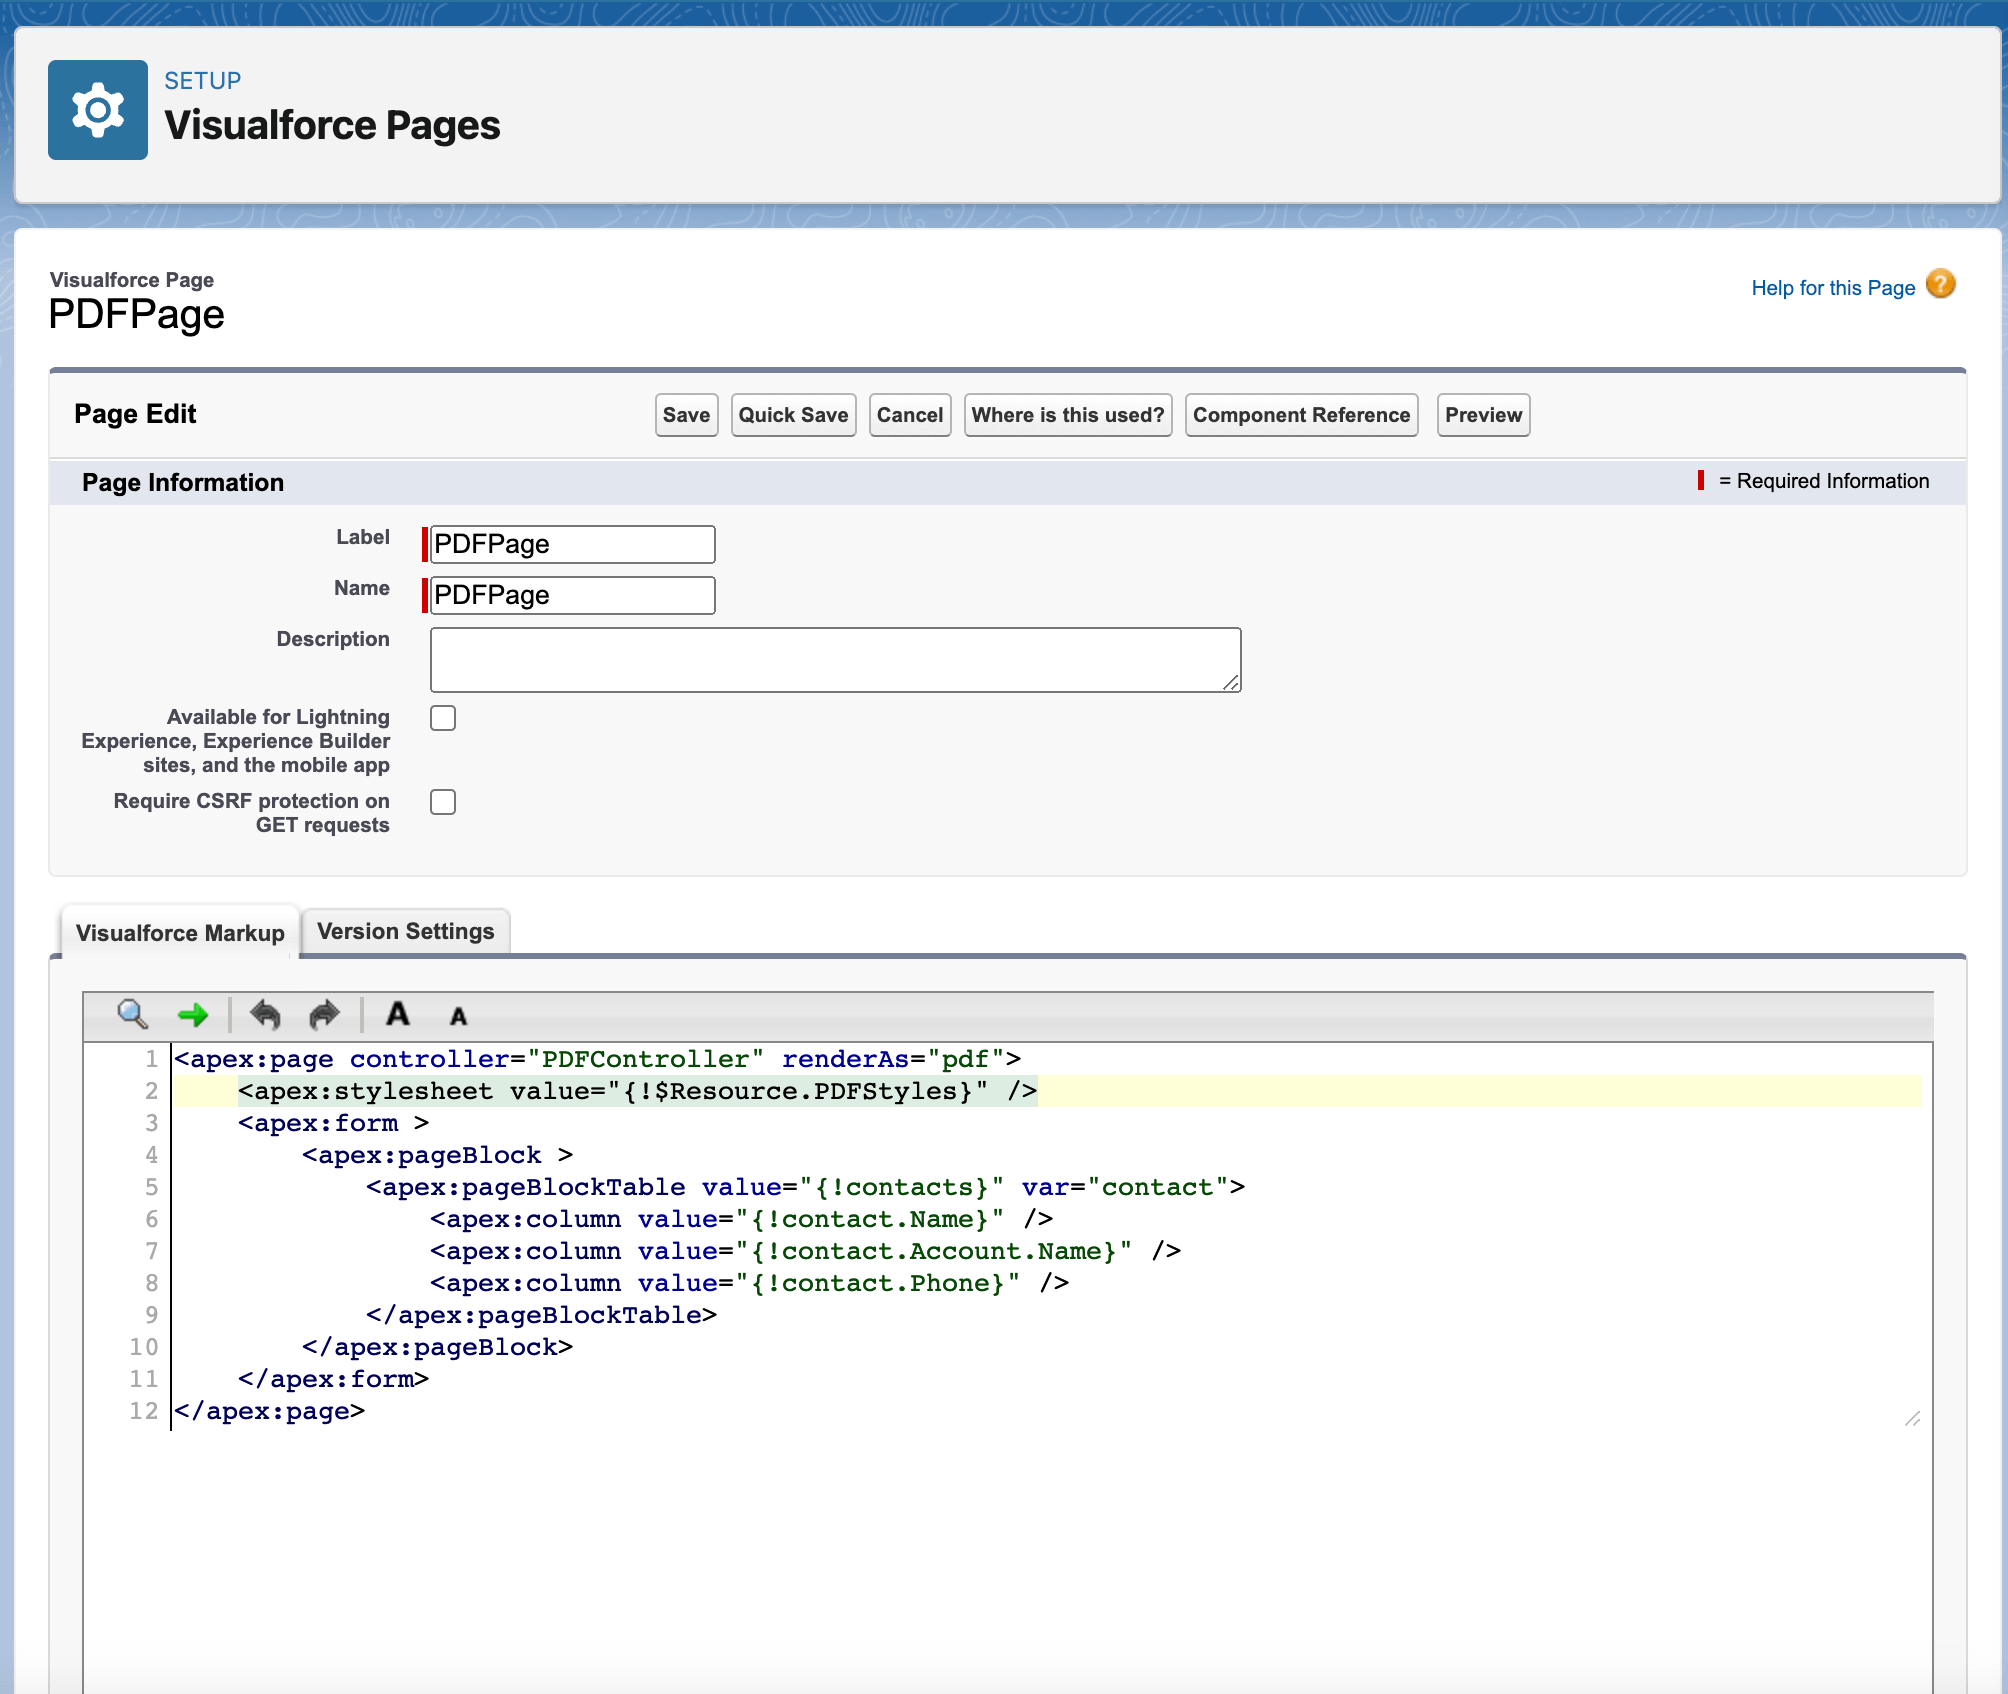 Linking the CSS file to the Visualforce page